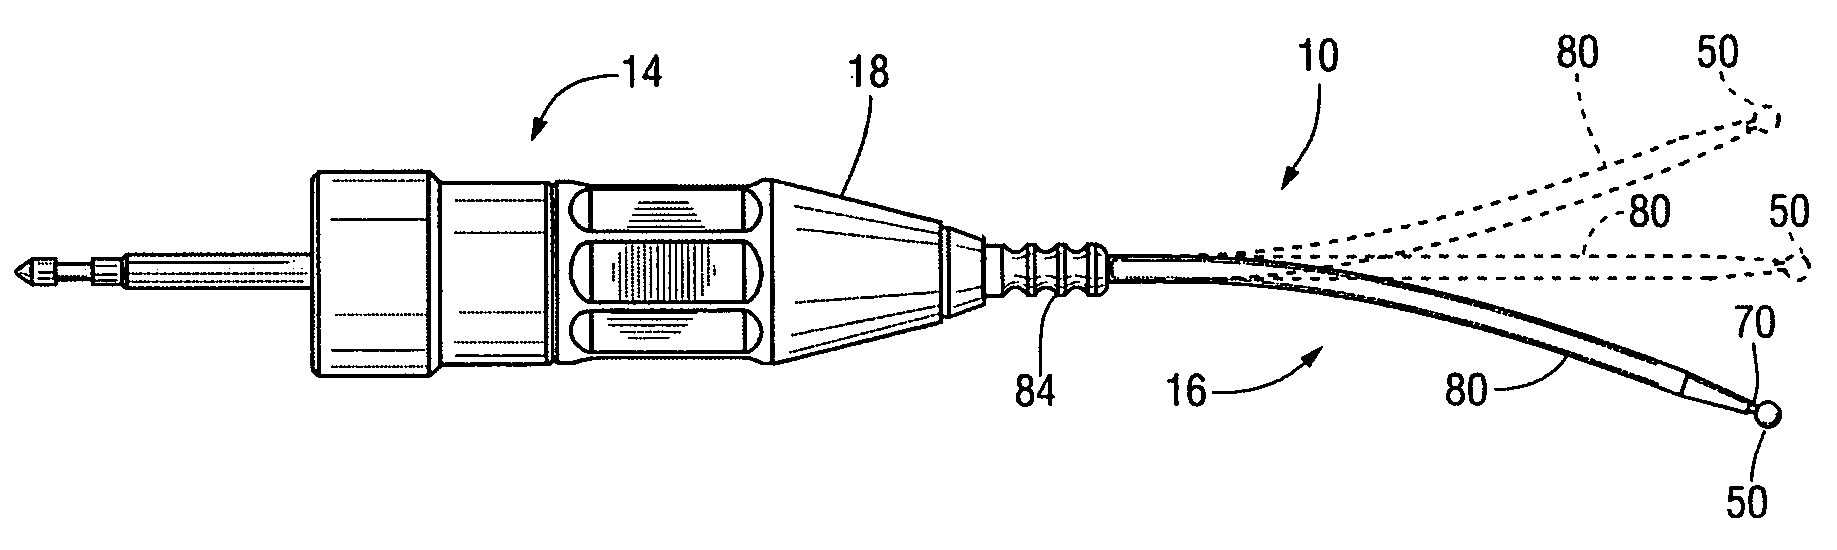 Surgical drill with curved burr attachment and method